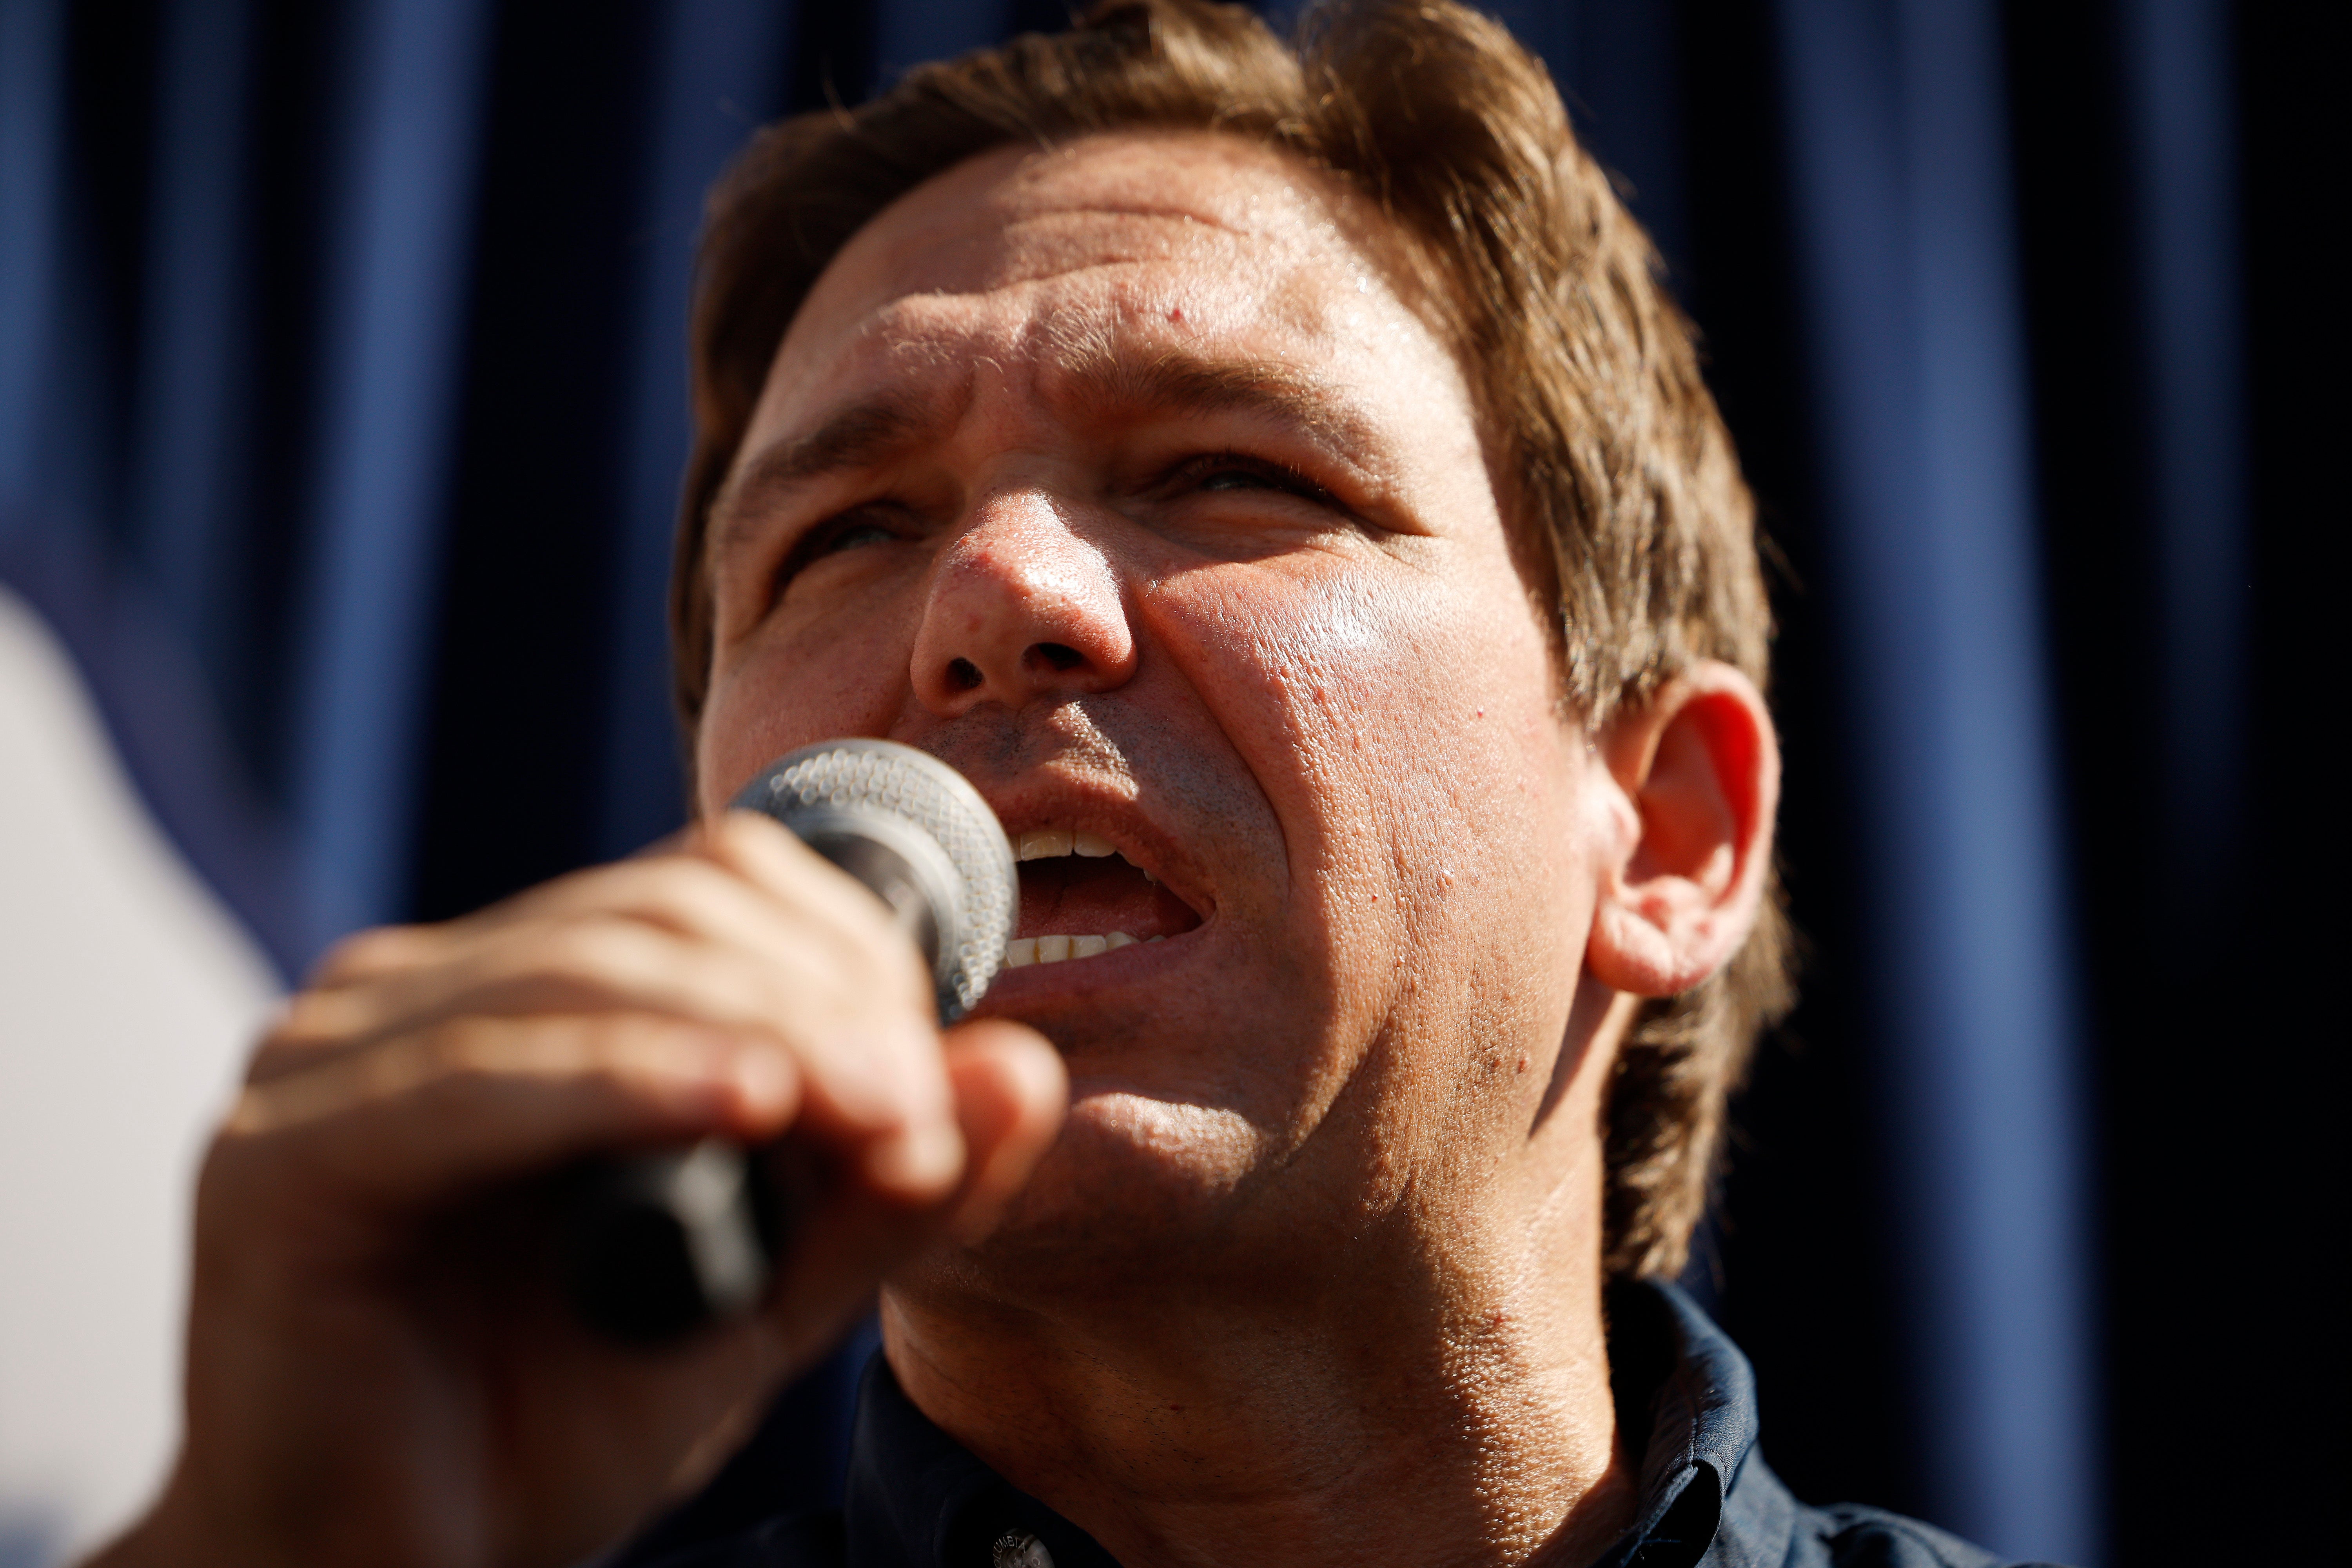 Ron DeSantis has played down the events of January 6